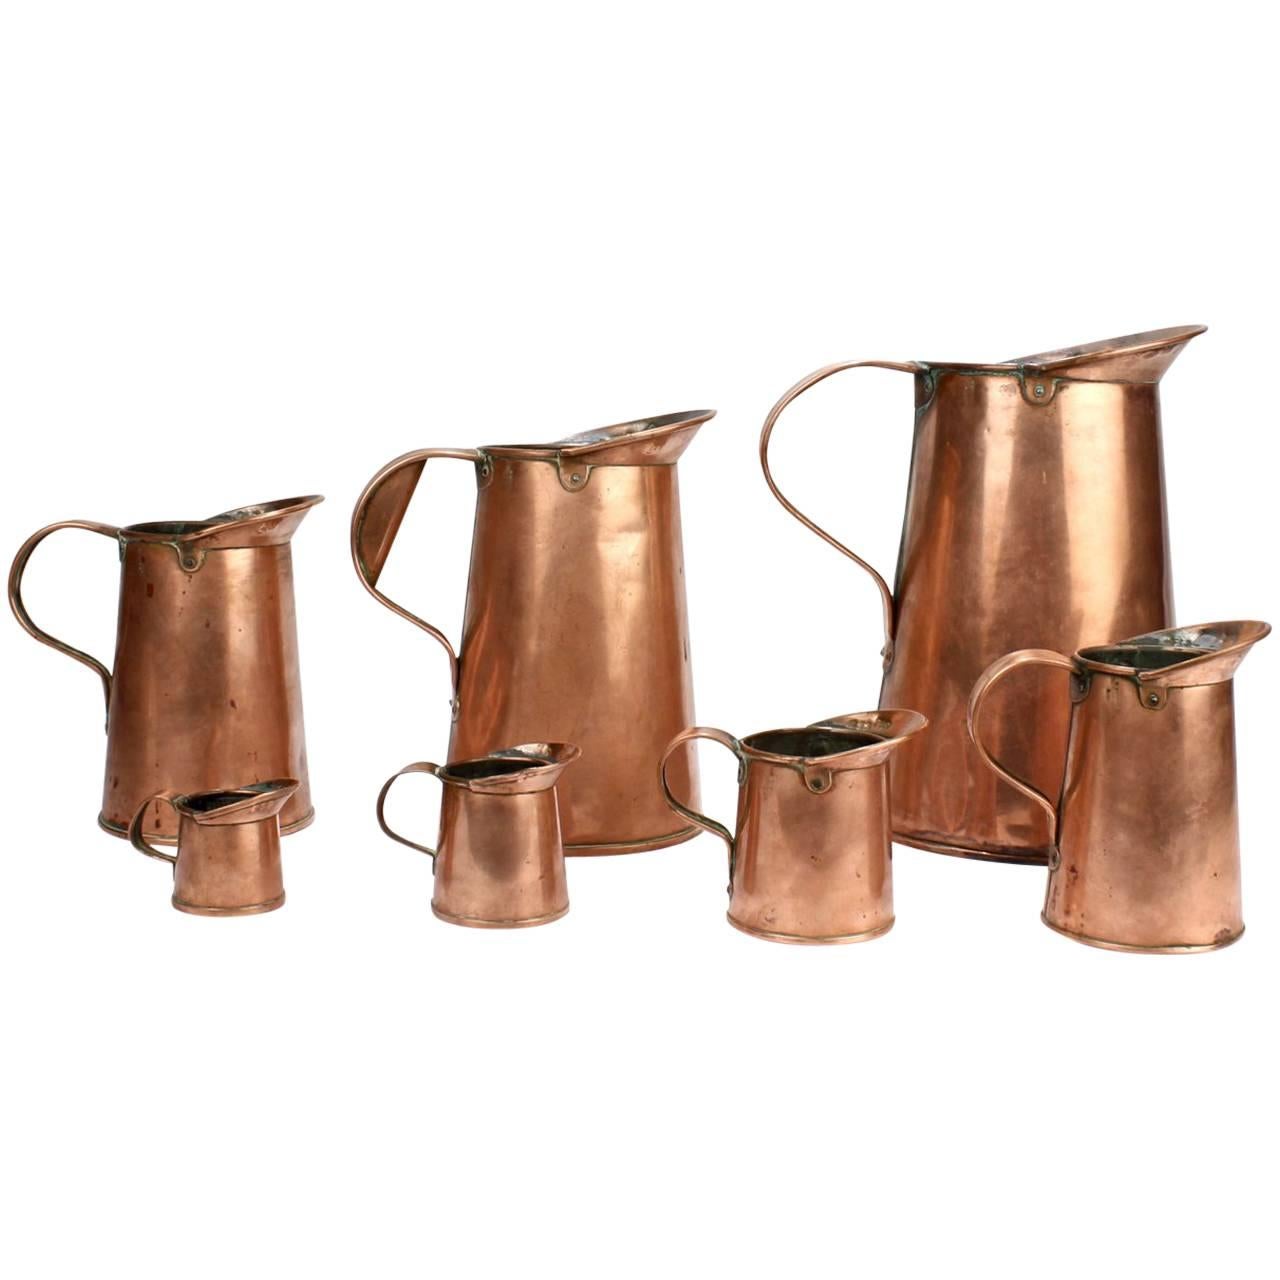 Set of Seven Antique 19th Century New York Graduated Copper Measures by B. Budde